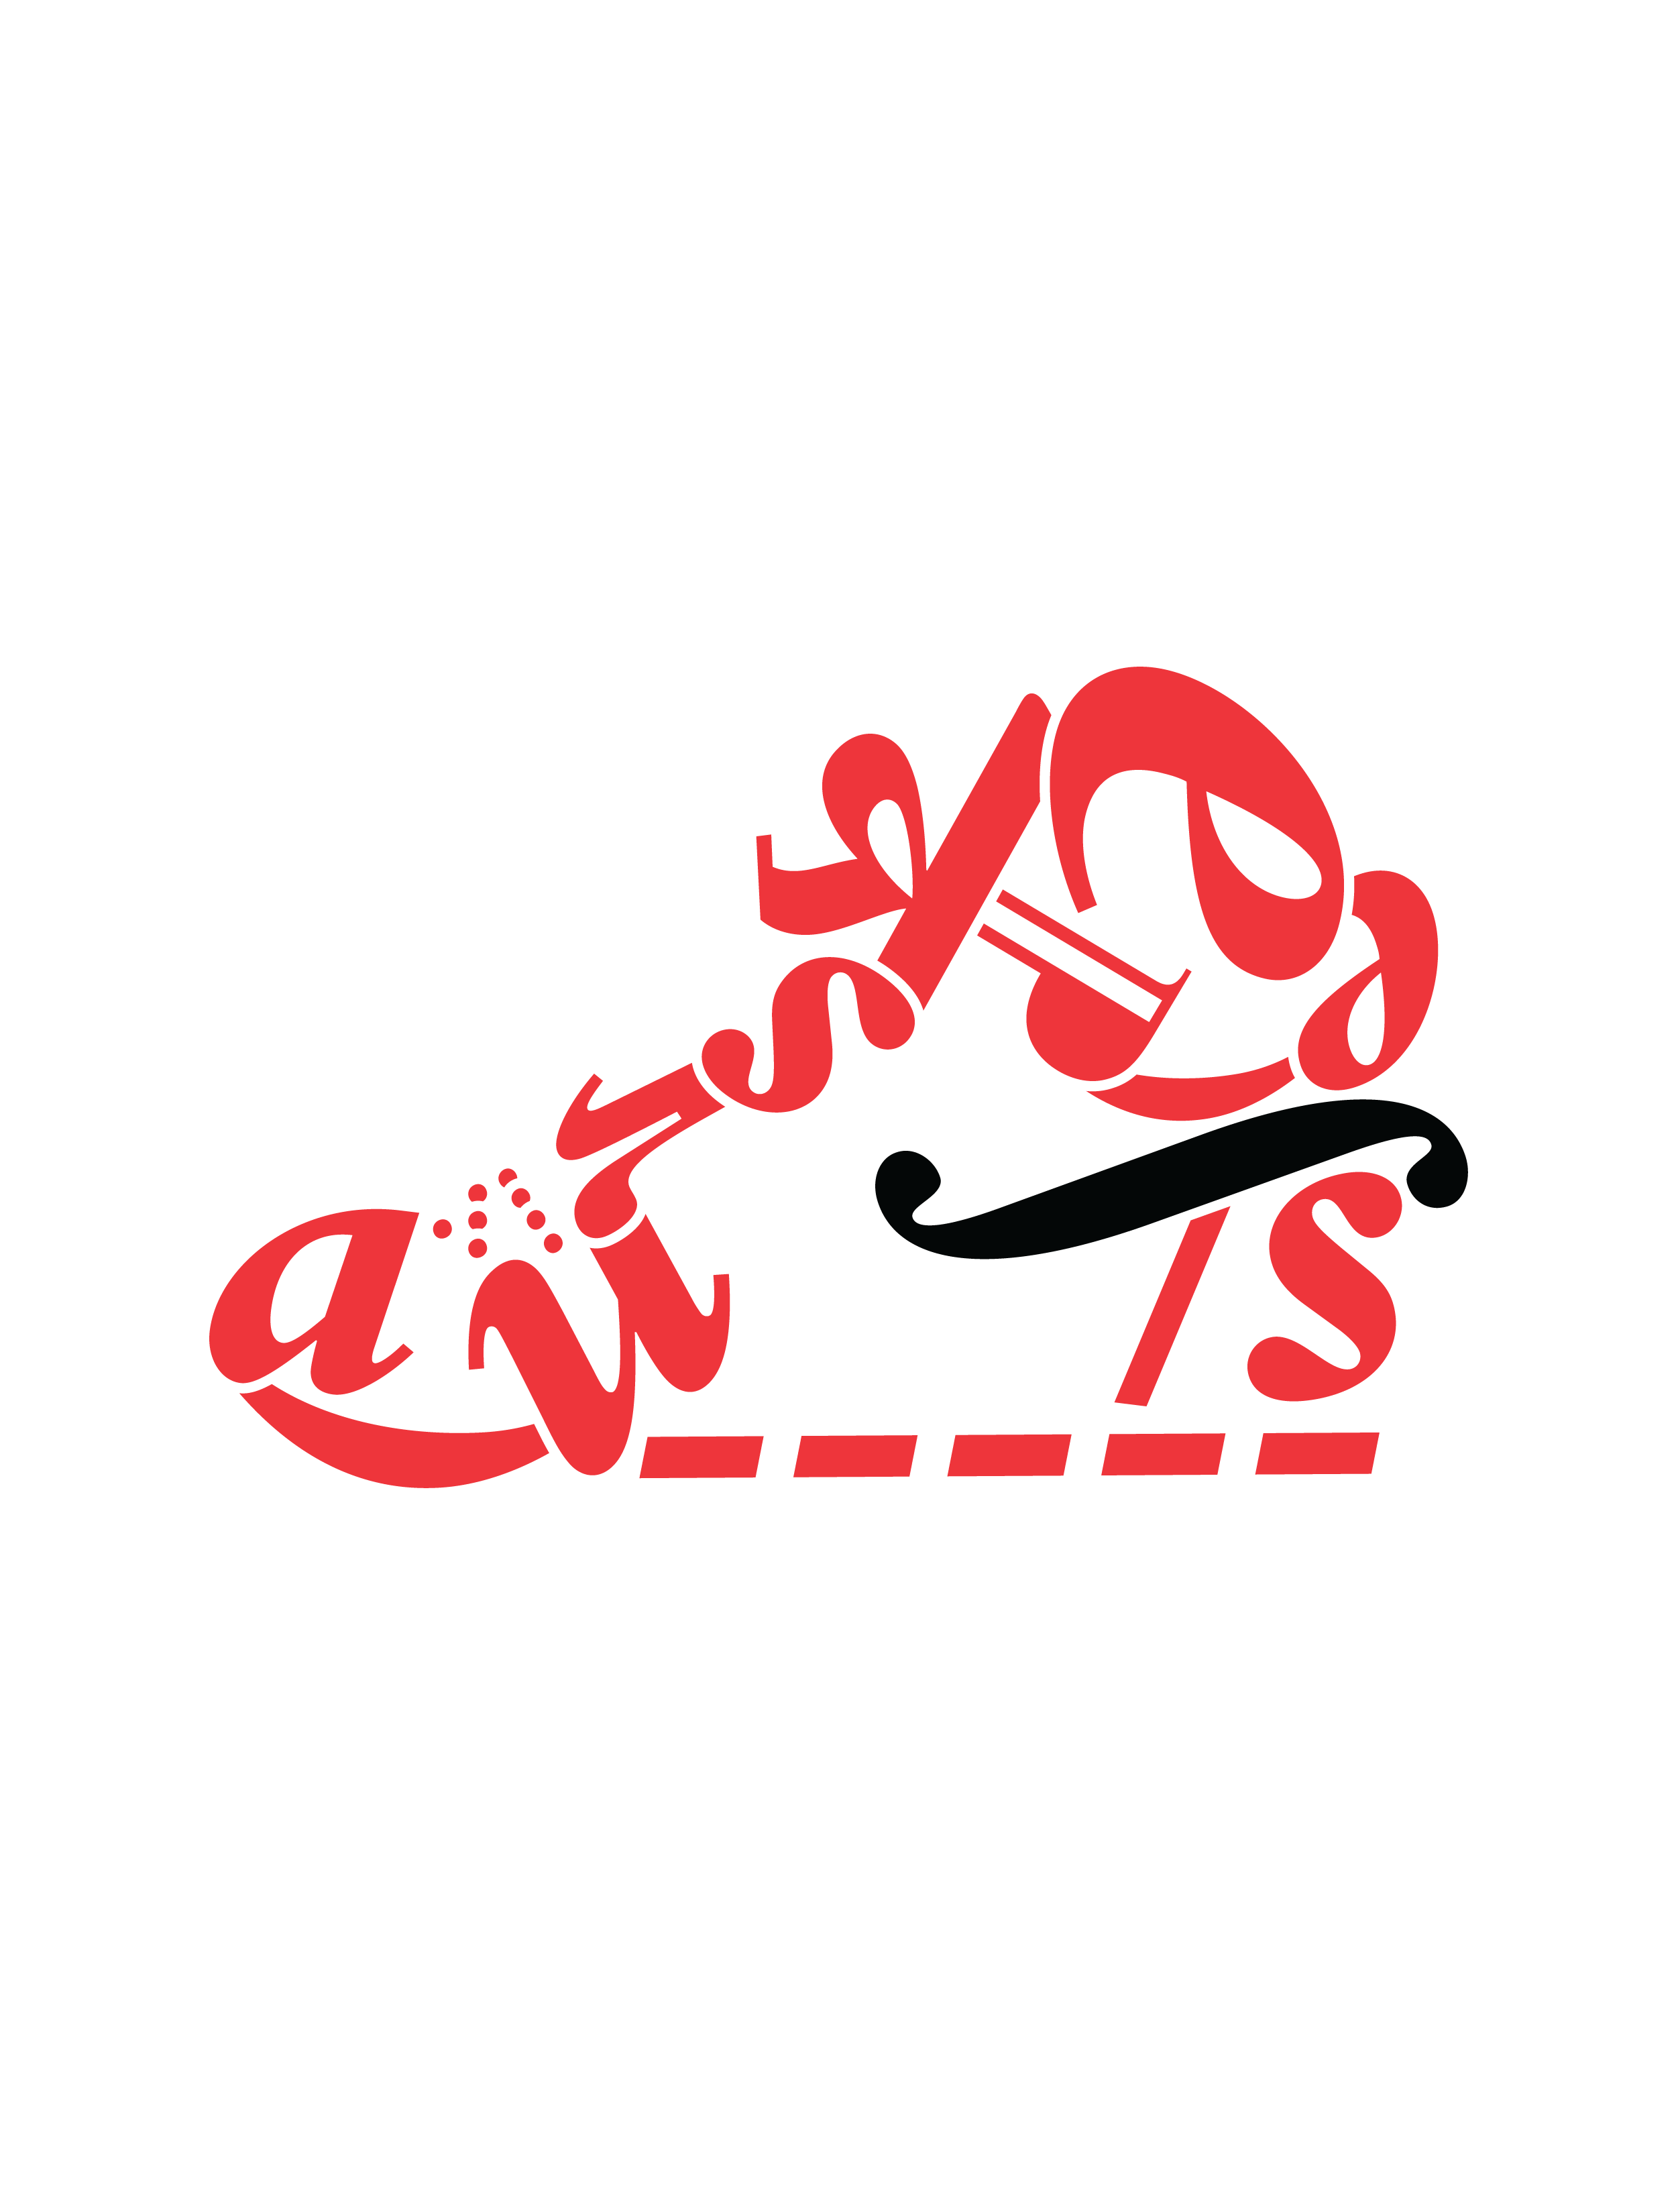 A sneaker created using typography, using the characters of the word sneakers